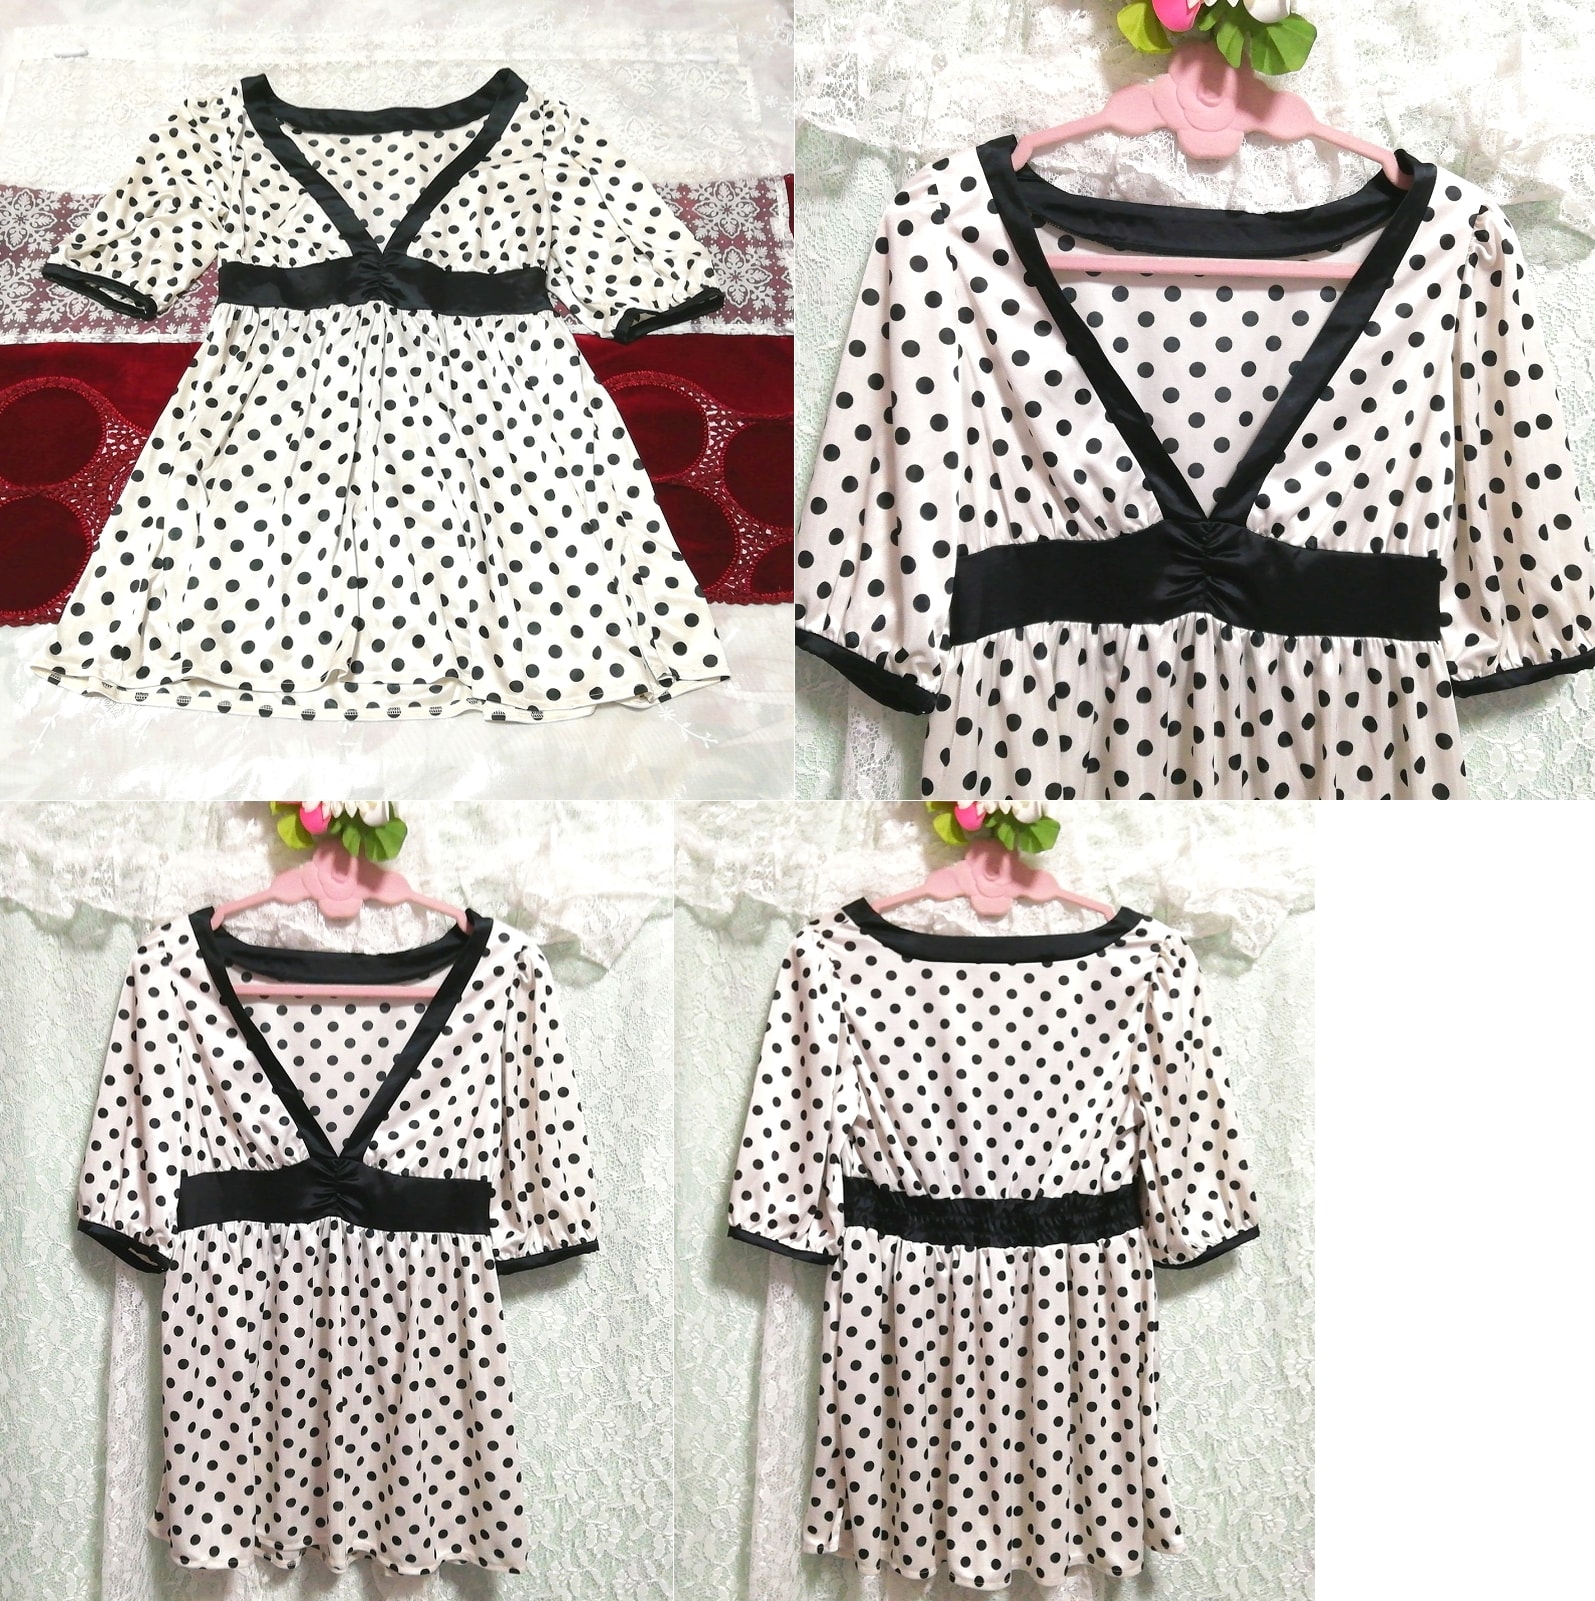 Black and white polka dot v neck tunic negligee nightgown dress, tunic, short sleeve, m size